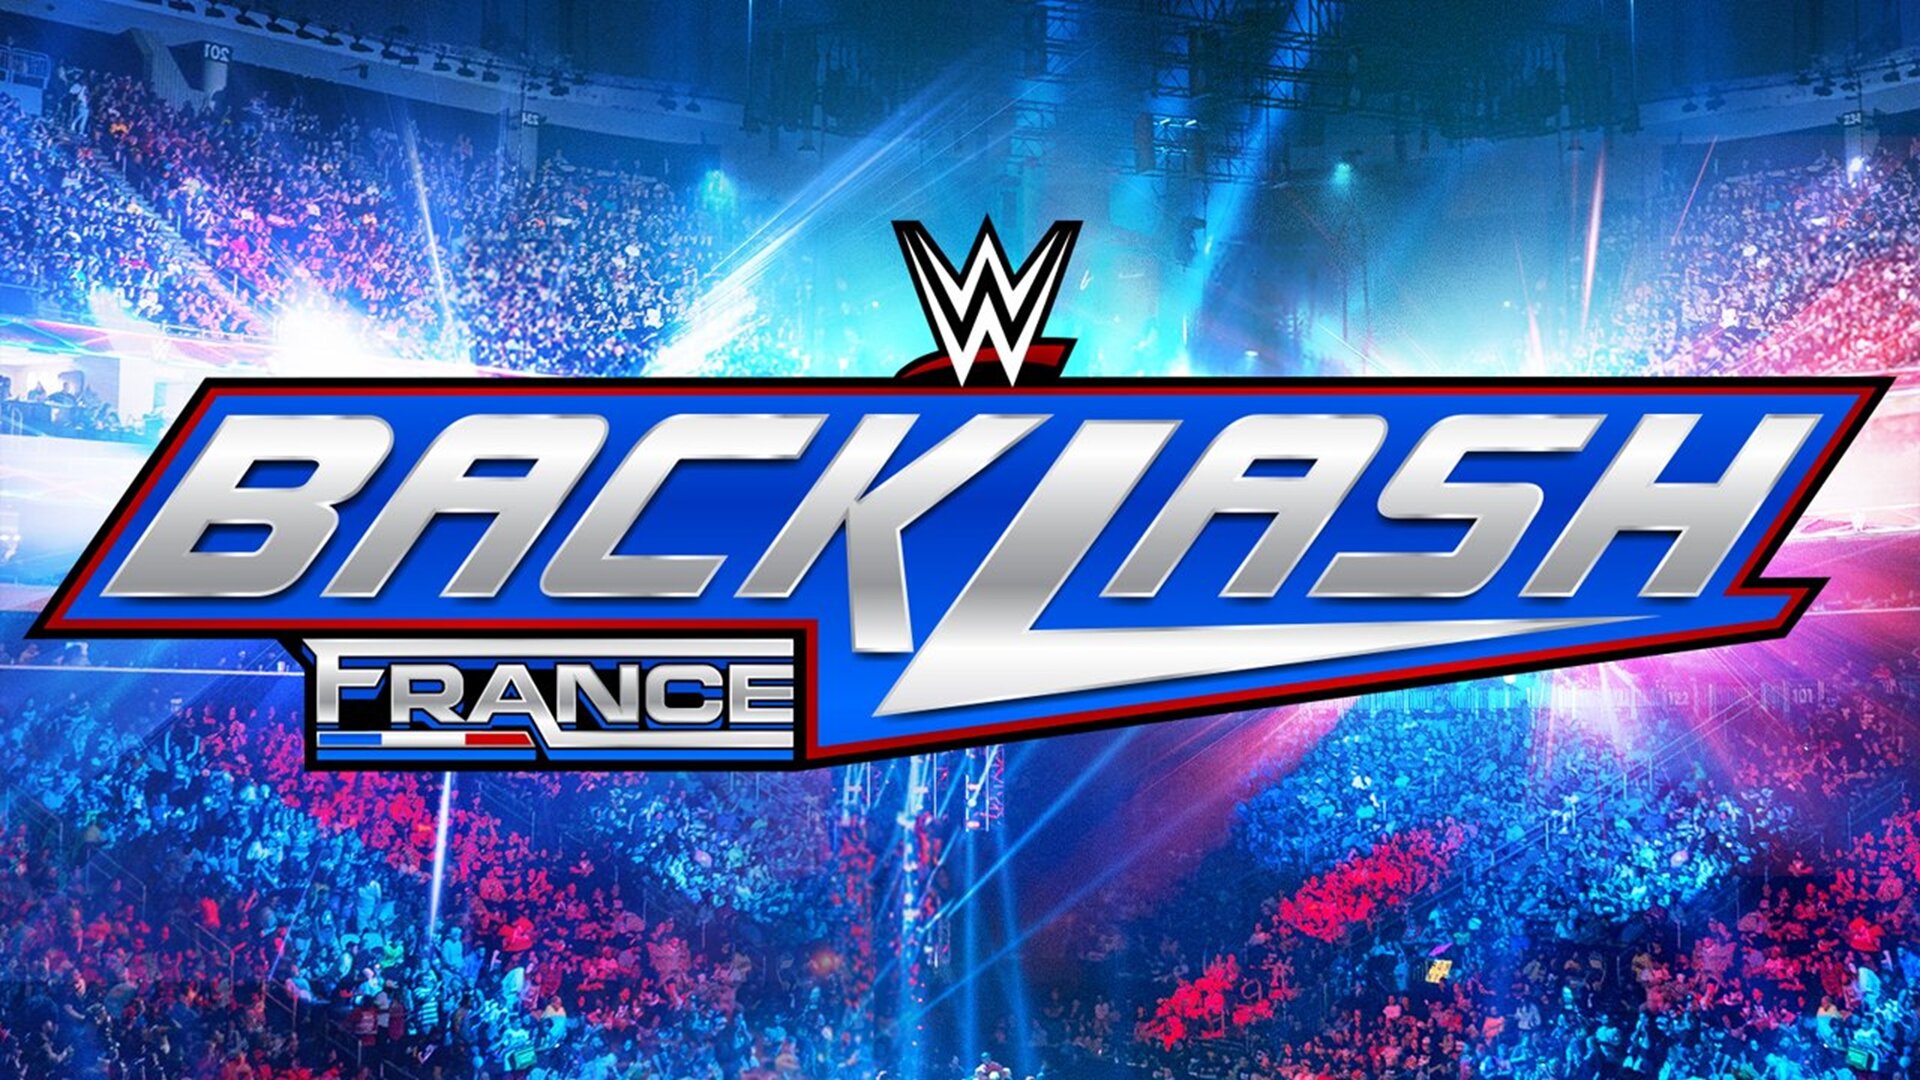 When & where is the next WWE PPV after 2024 Backlash France?